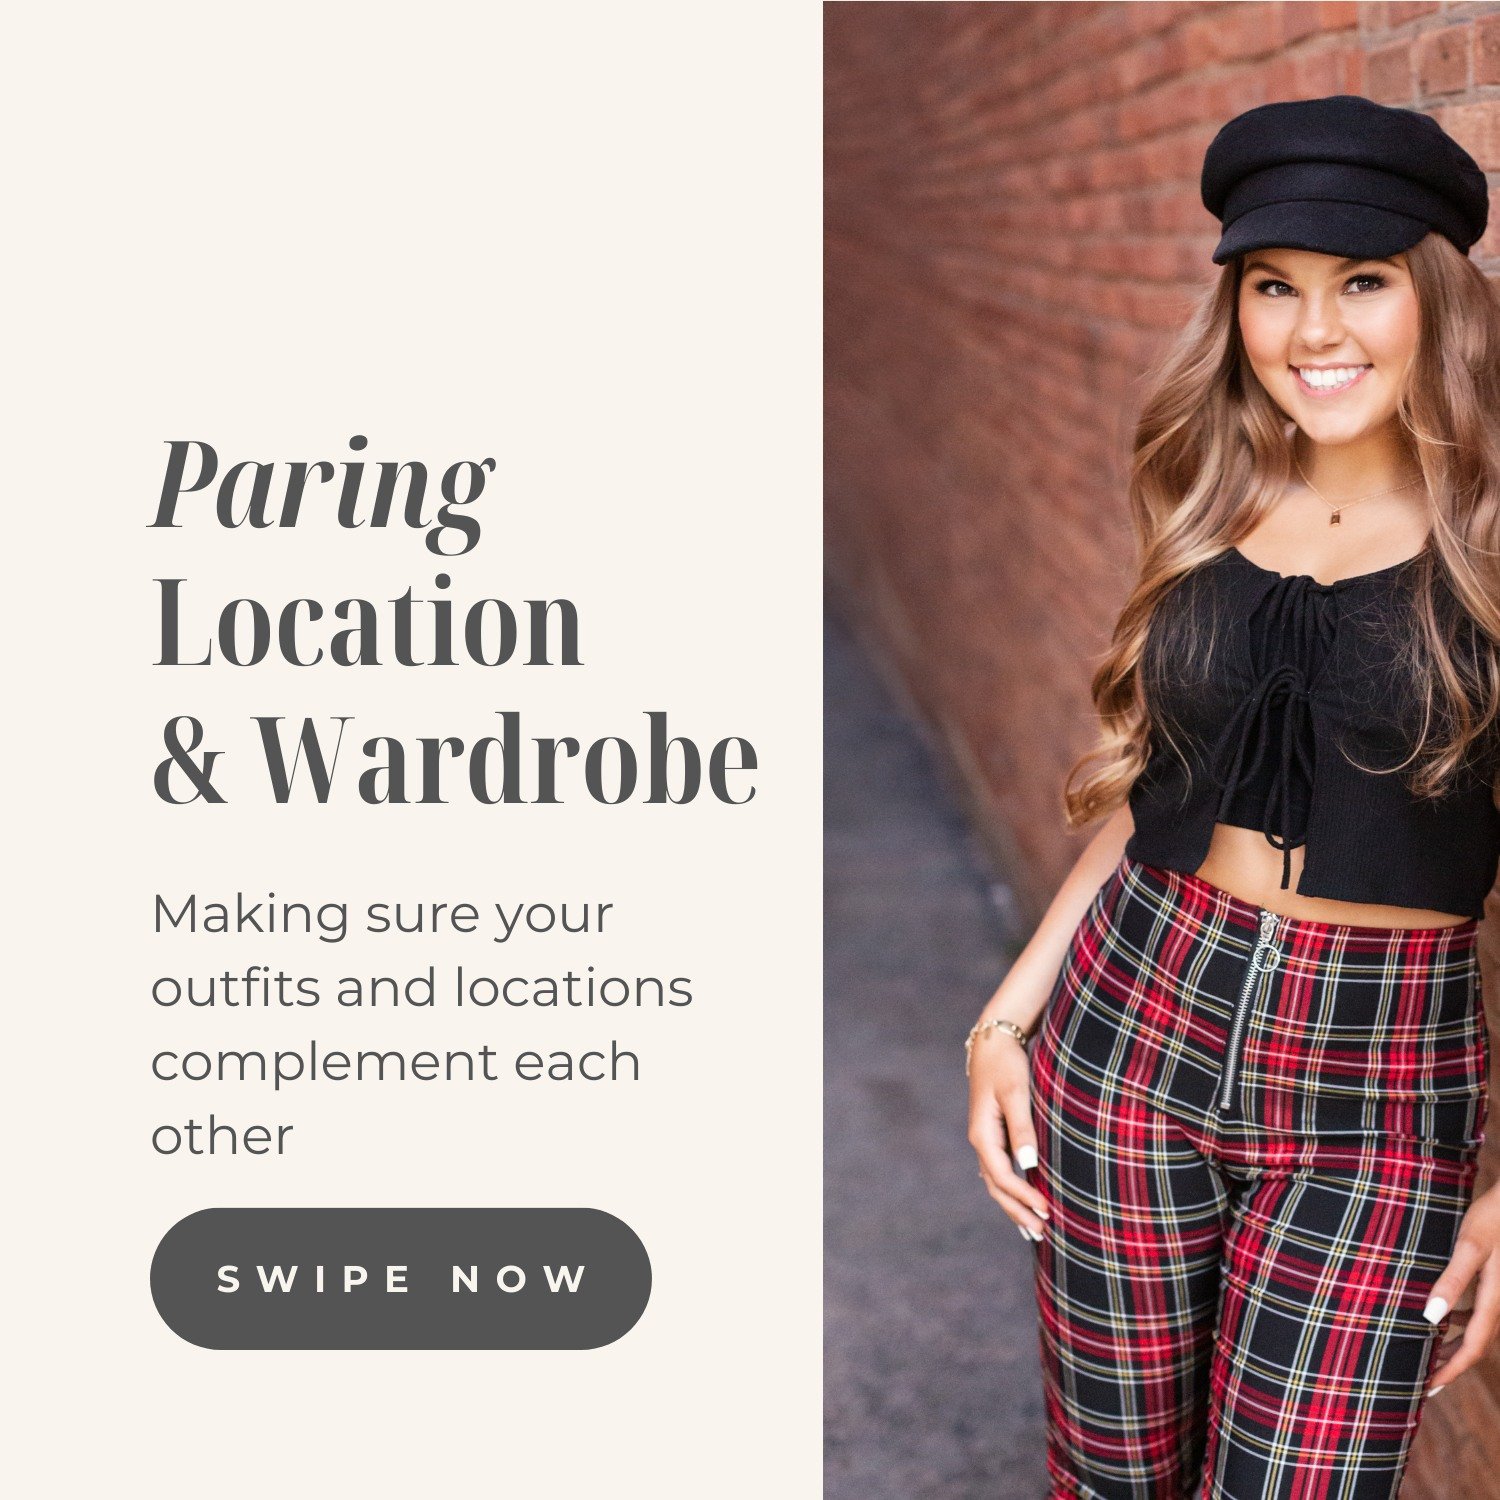 Feeling overwhelmed trying to nail down the perfect outfits and locations for your senior photos? 😳 I totally get it! But hey, as an MRP Senior, you can kick back and relax because I've got you covered.

Together, we'll pick outfits that vibe with e